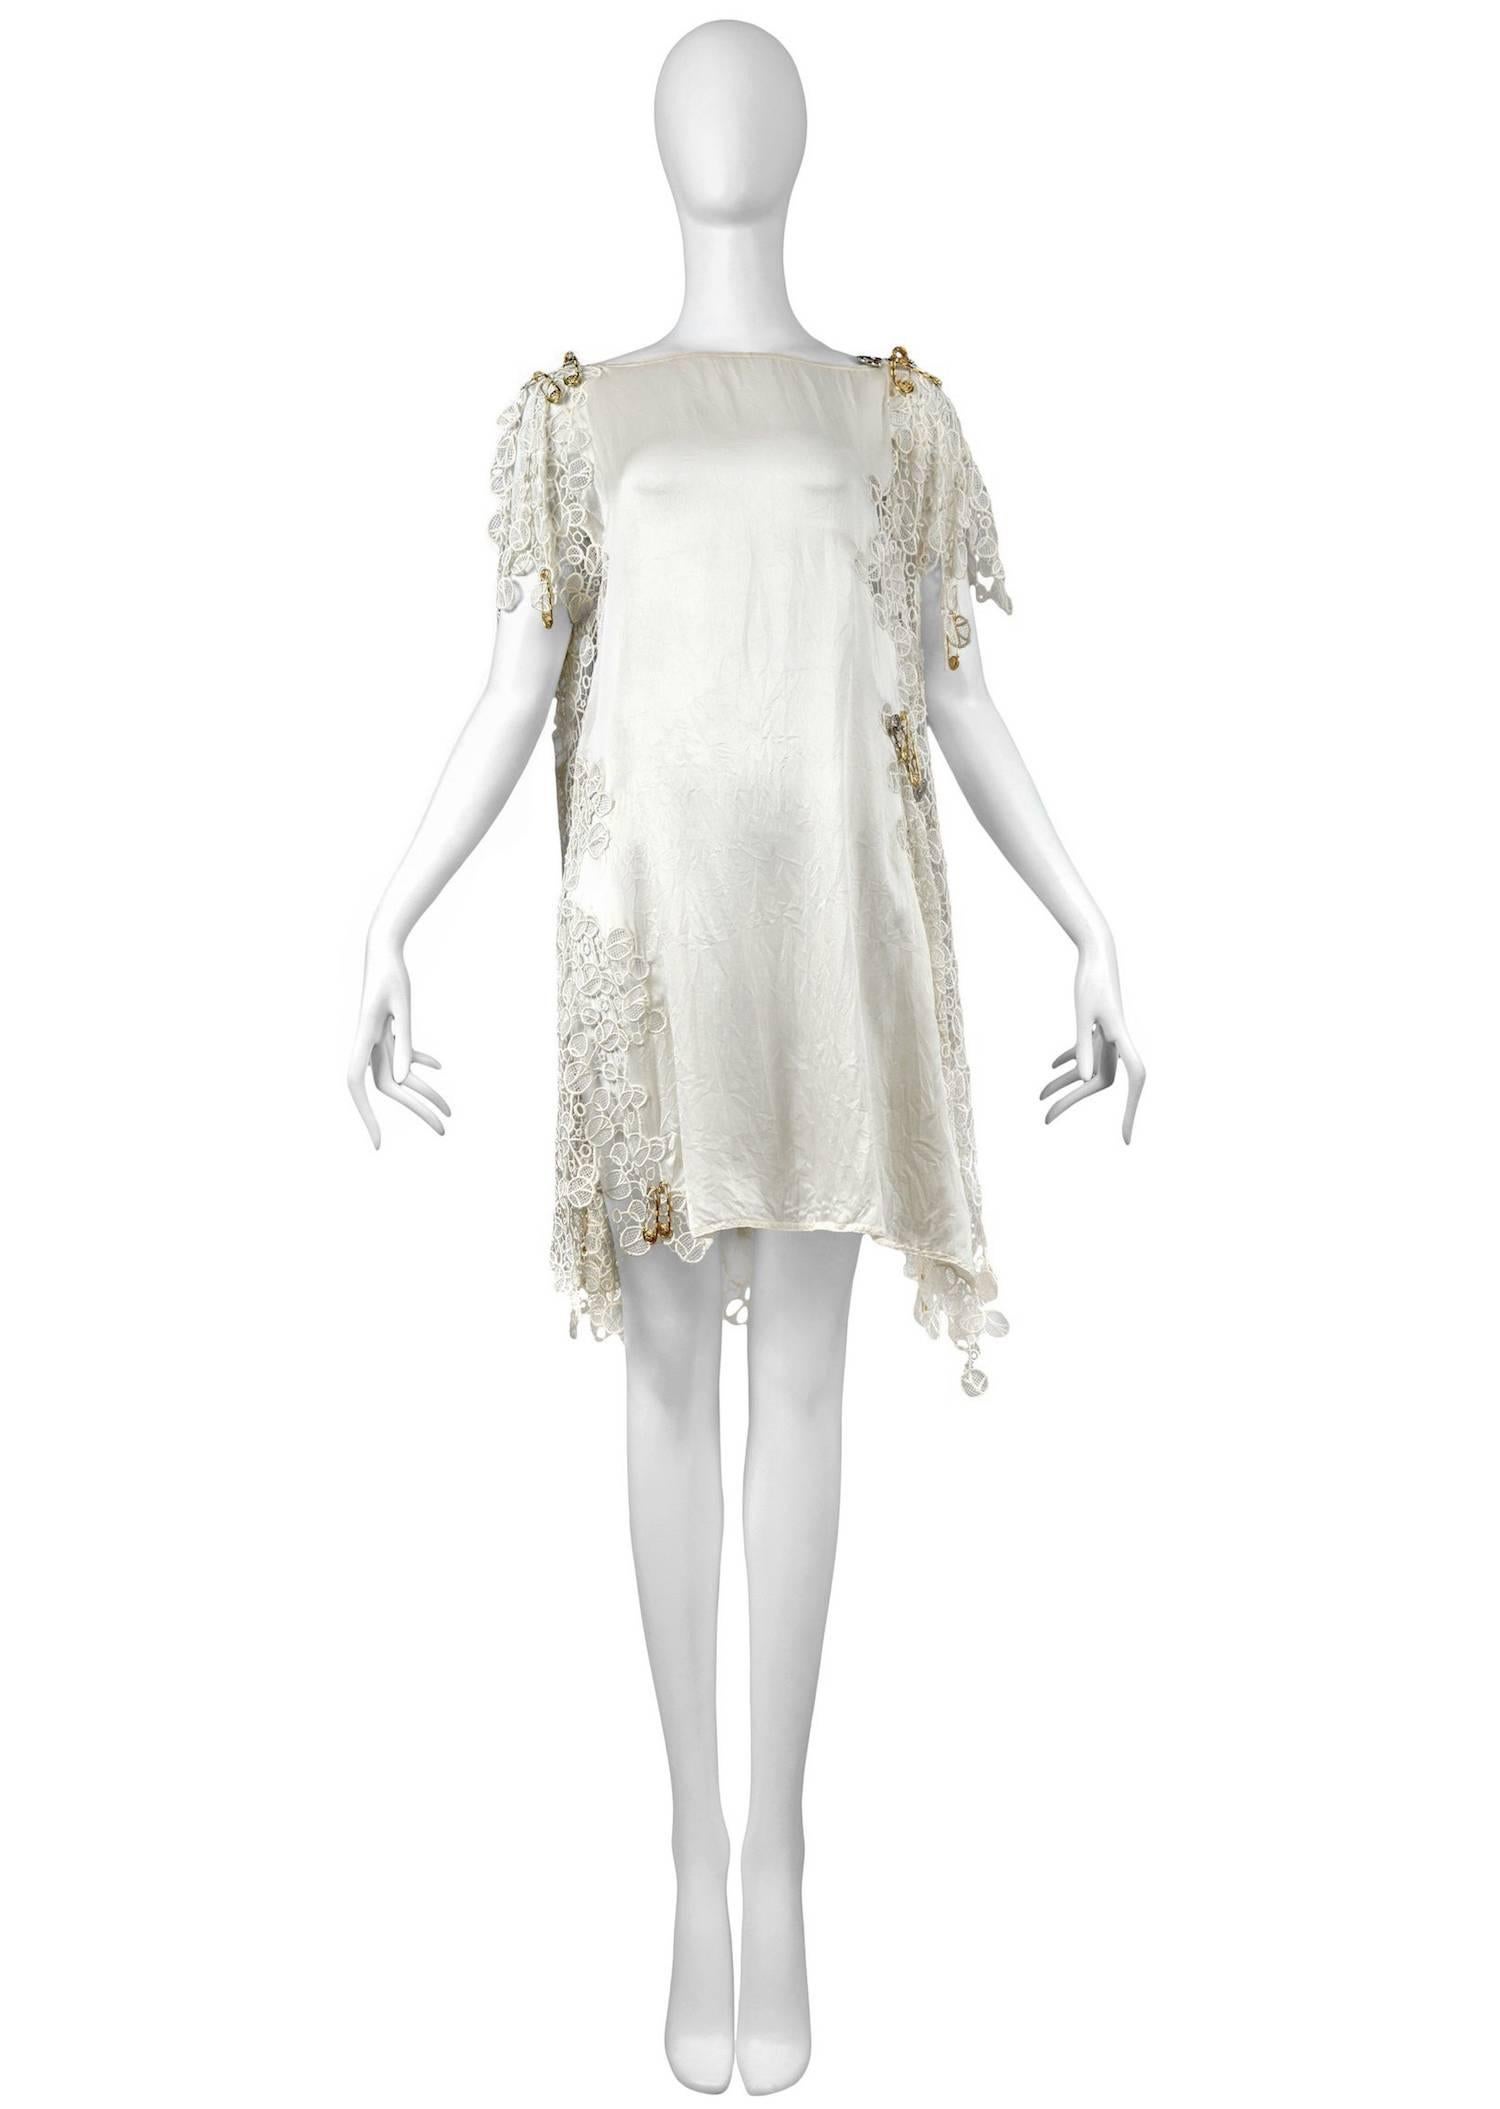 Vintage Gianni Versace trapeze style white lace dress with gold tone medusa safety pins scattered throughout the lace trim. Important design from Versace's groundbreaking and iconic 1994 collection.
Please inquire for additional images.